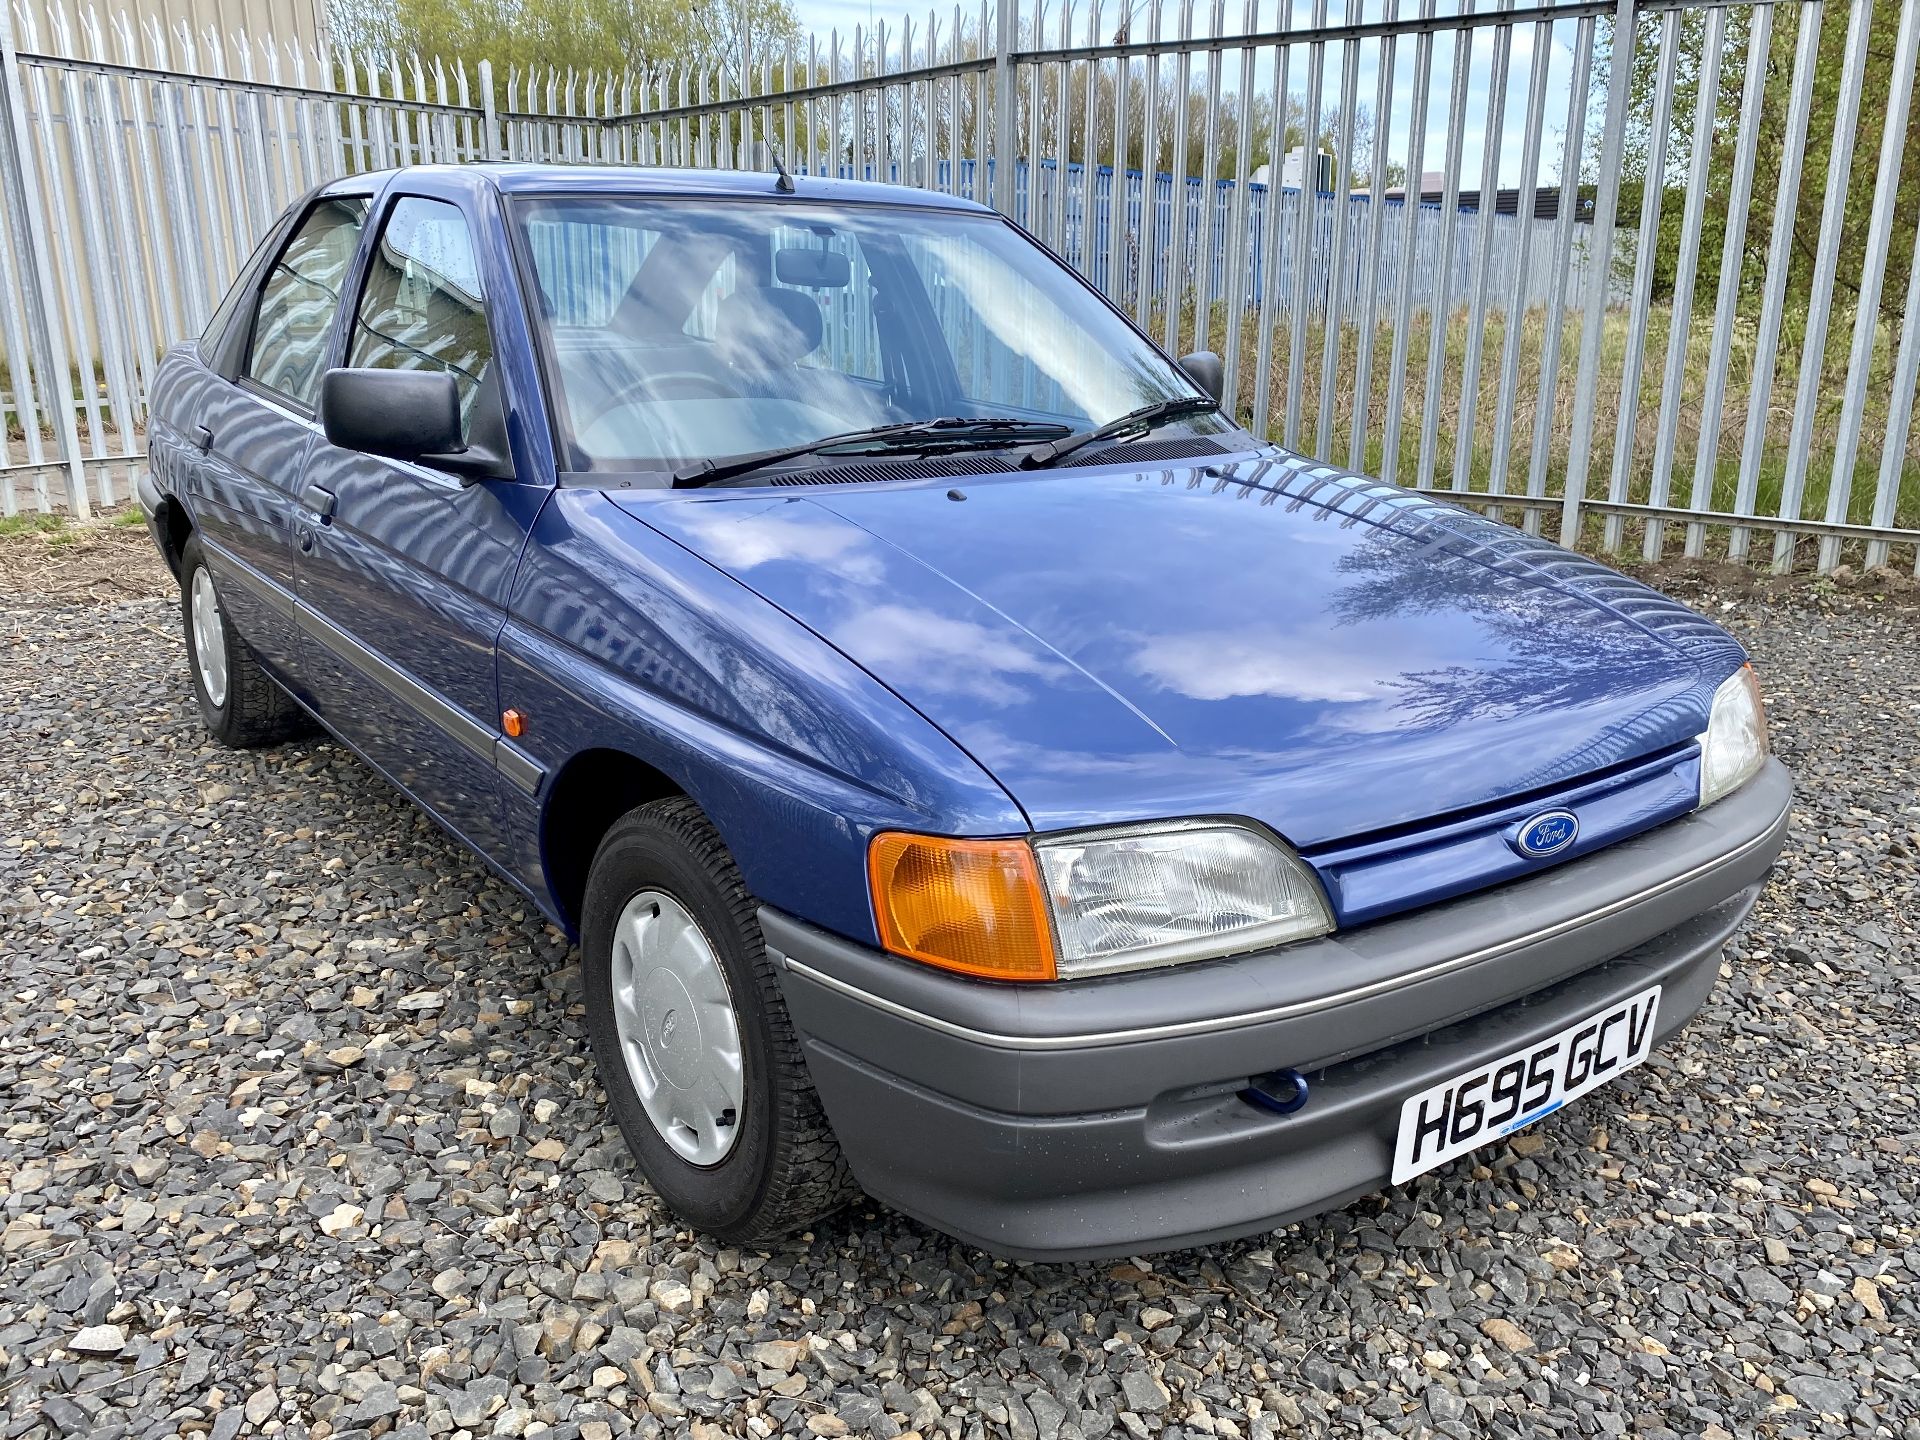 Ford Escort LX  - Image 22 of 54